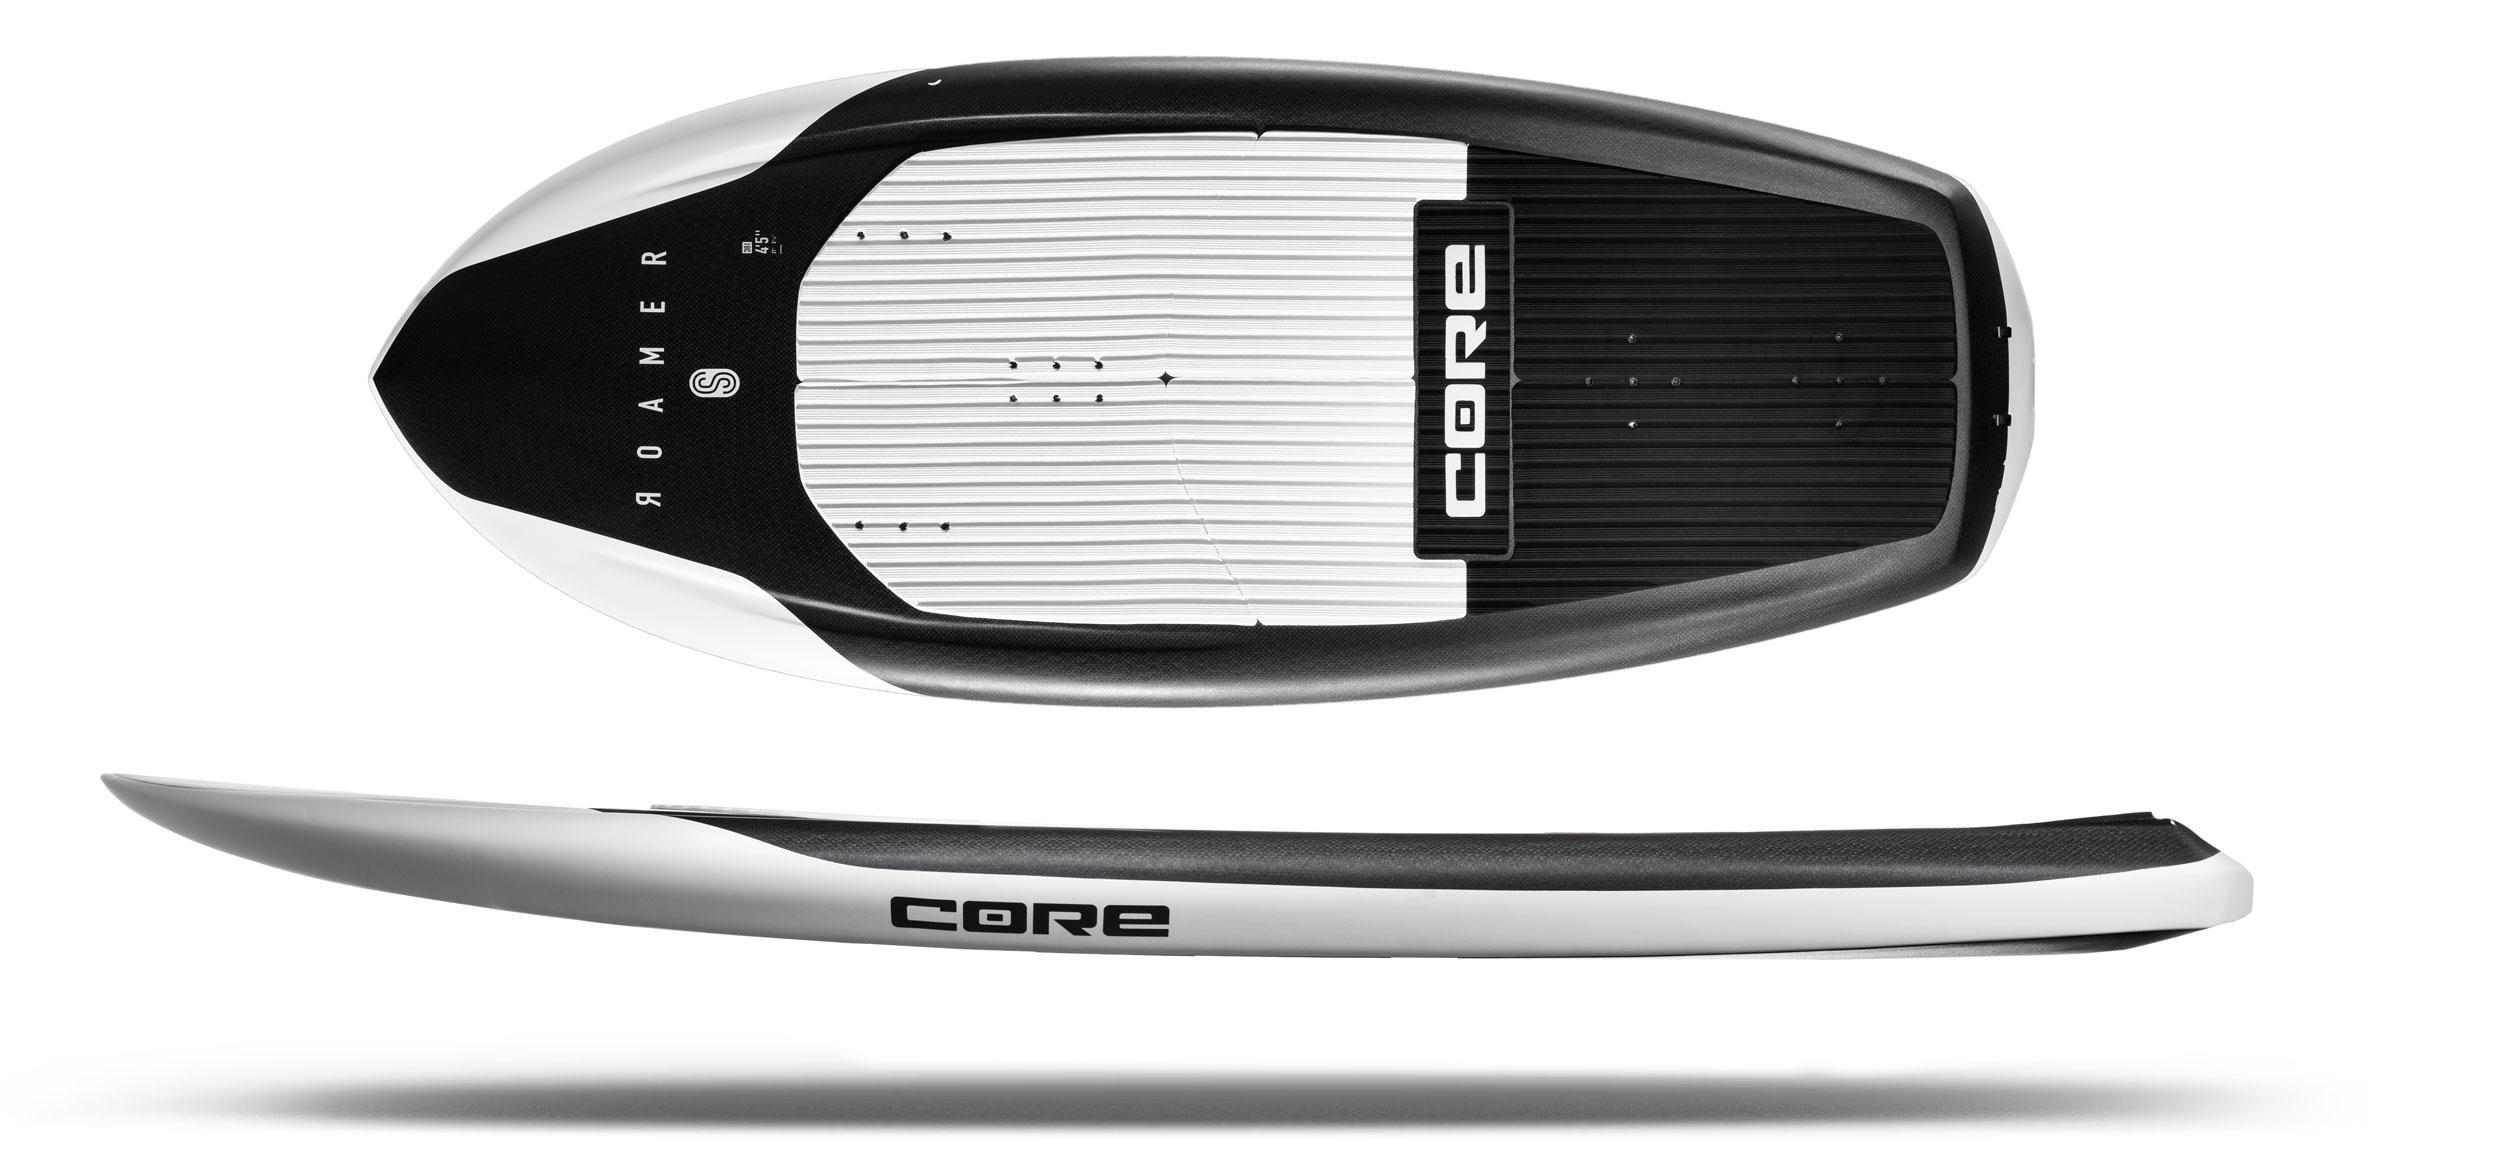 CORE Roamer S Shape Top and Side view